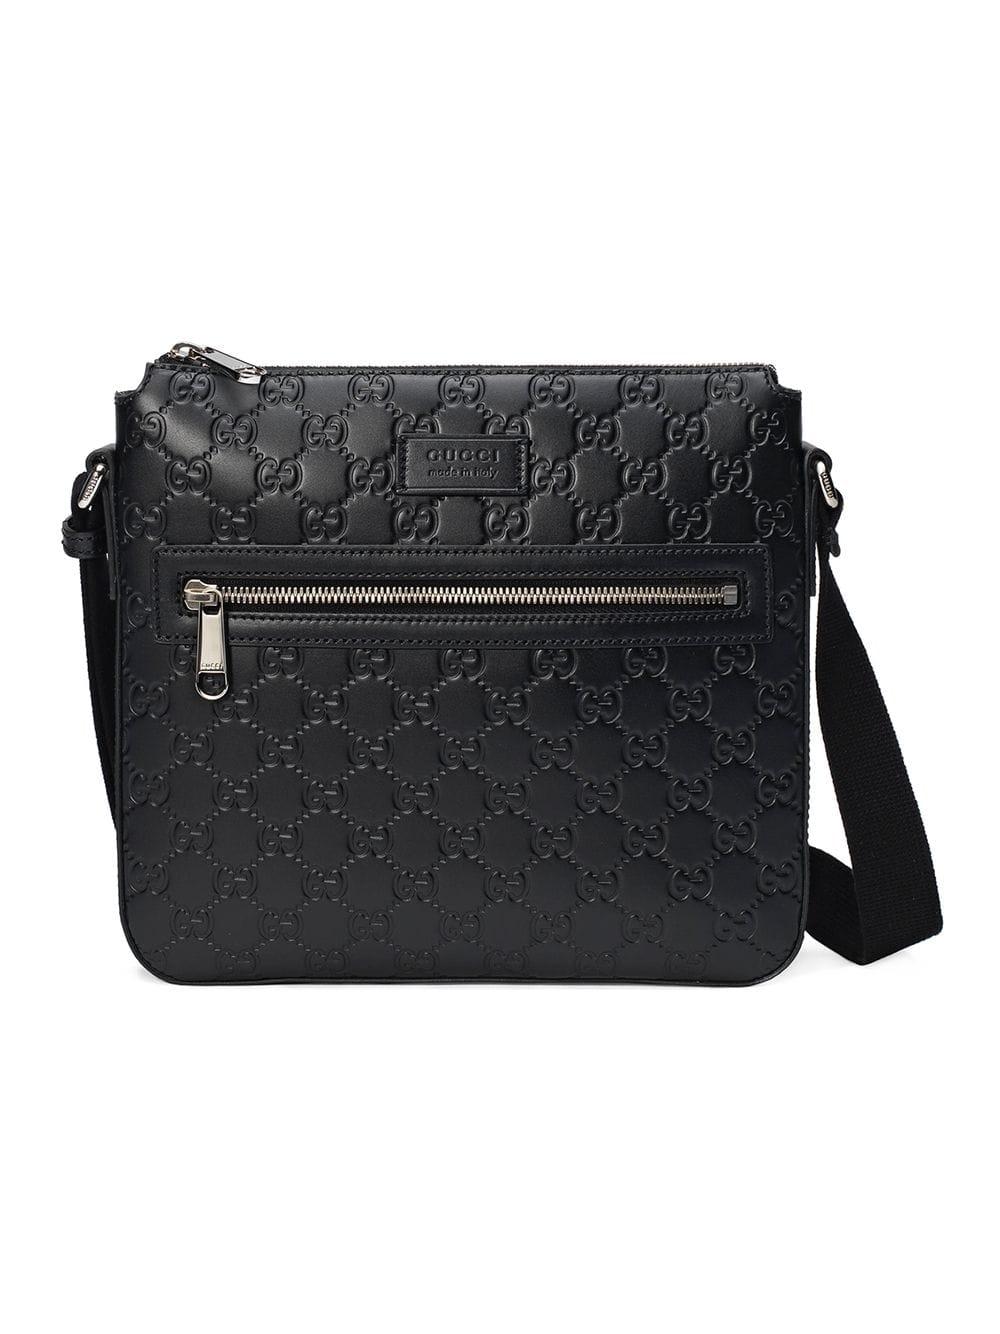 Gucci Leather Signature Messenger Bag in Black for Men - Save 41% - Lyst